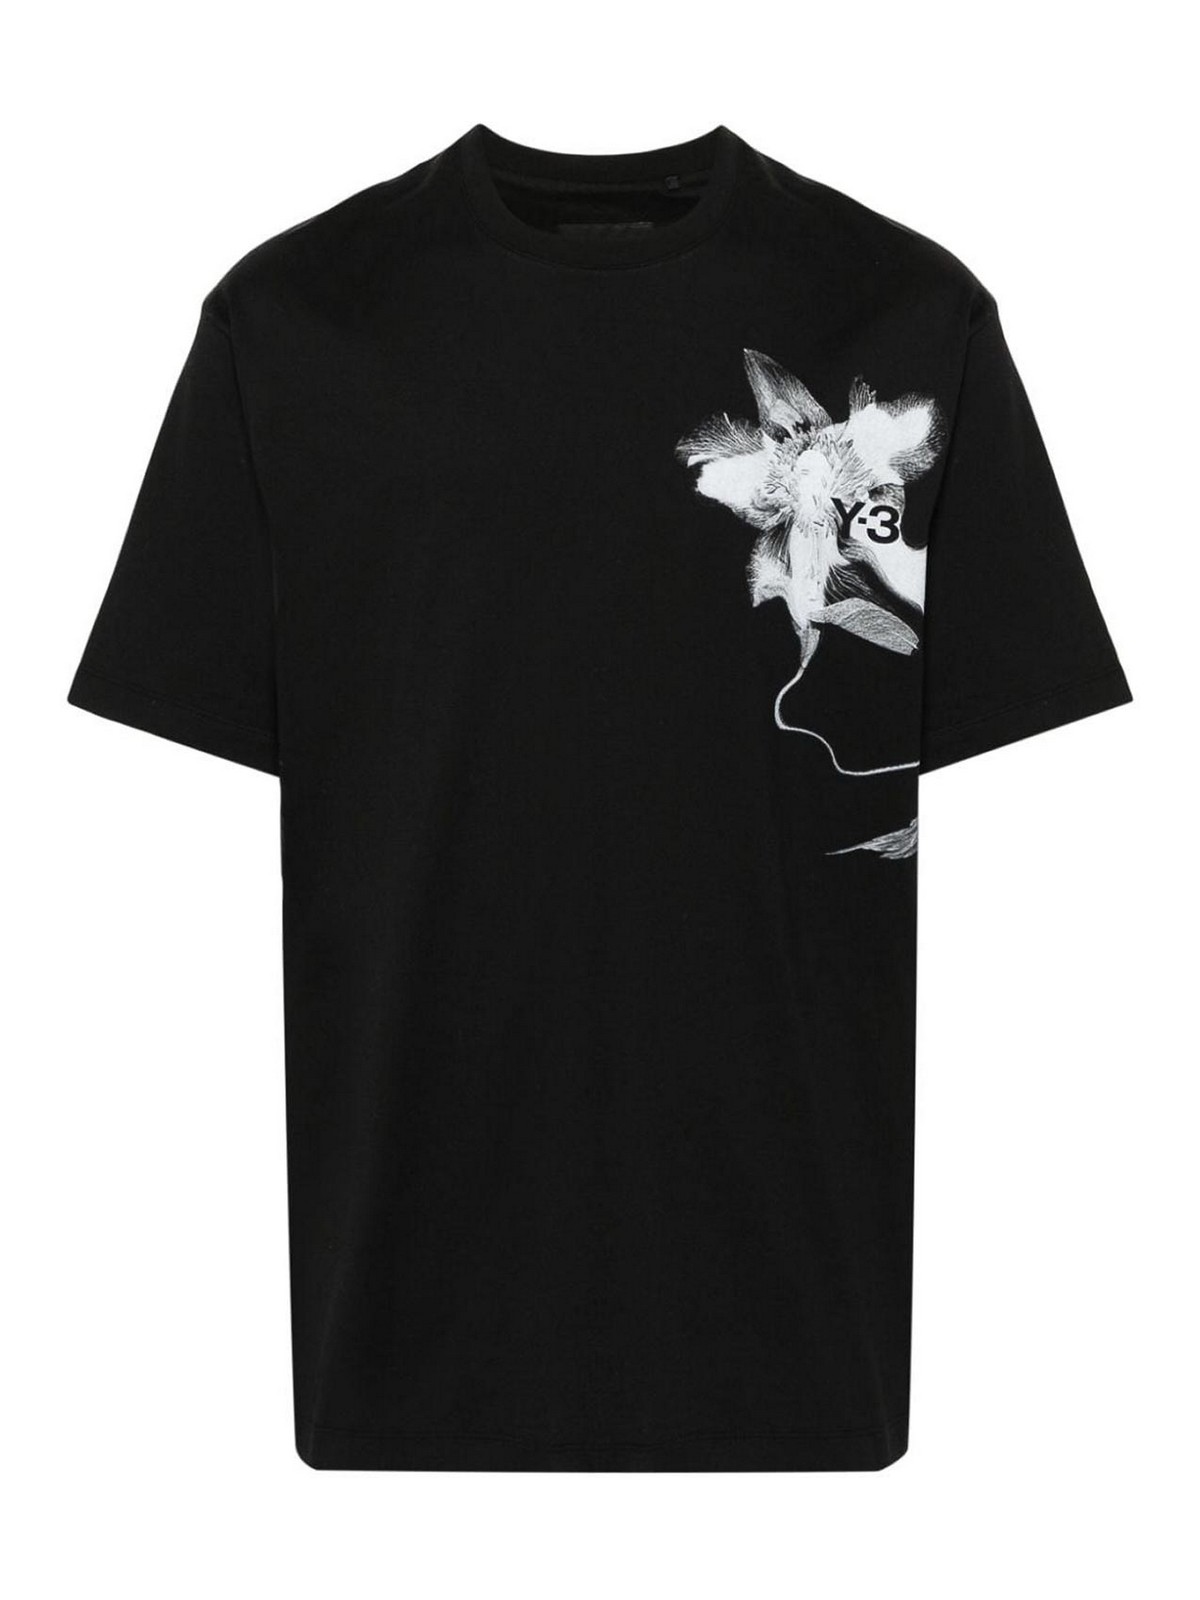 Y-3 T-SHIRT WITH PRINT